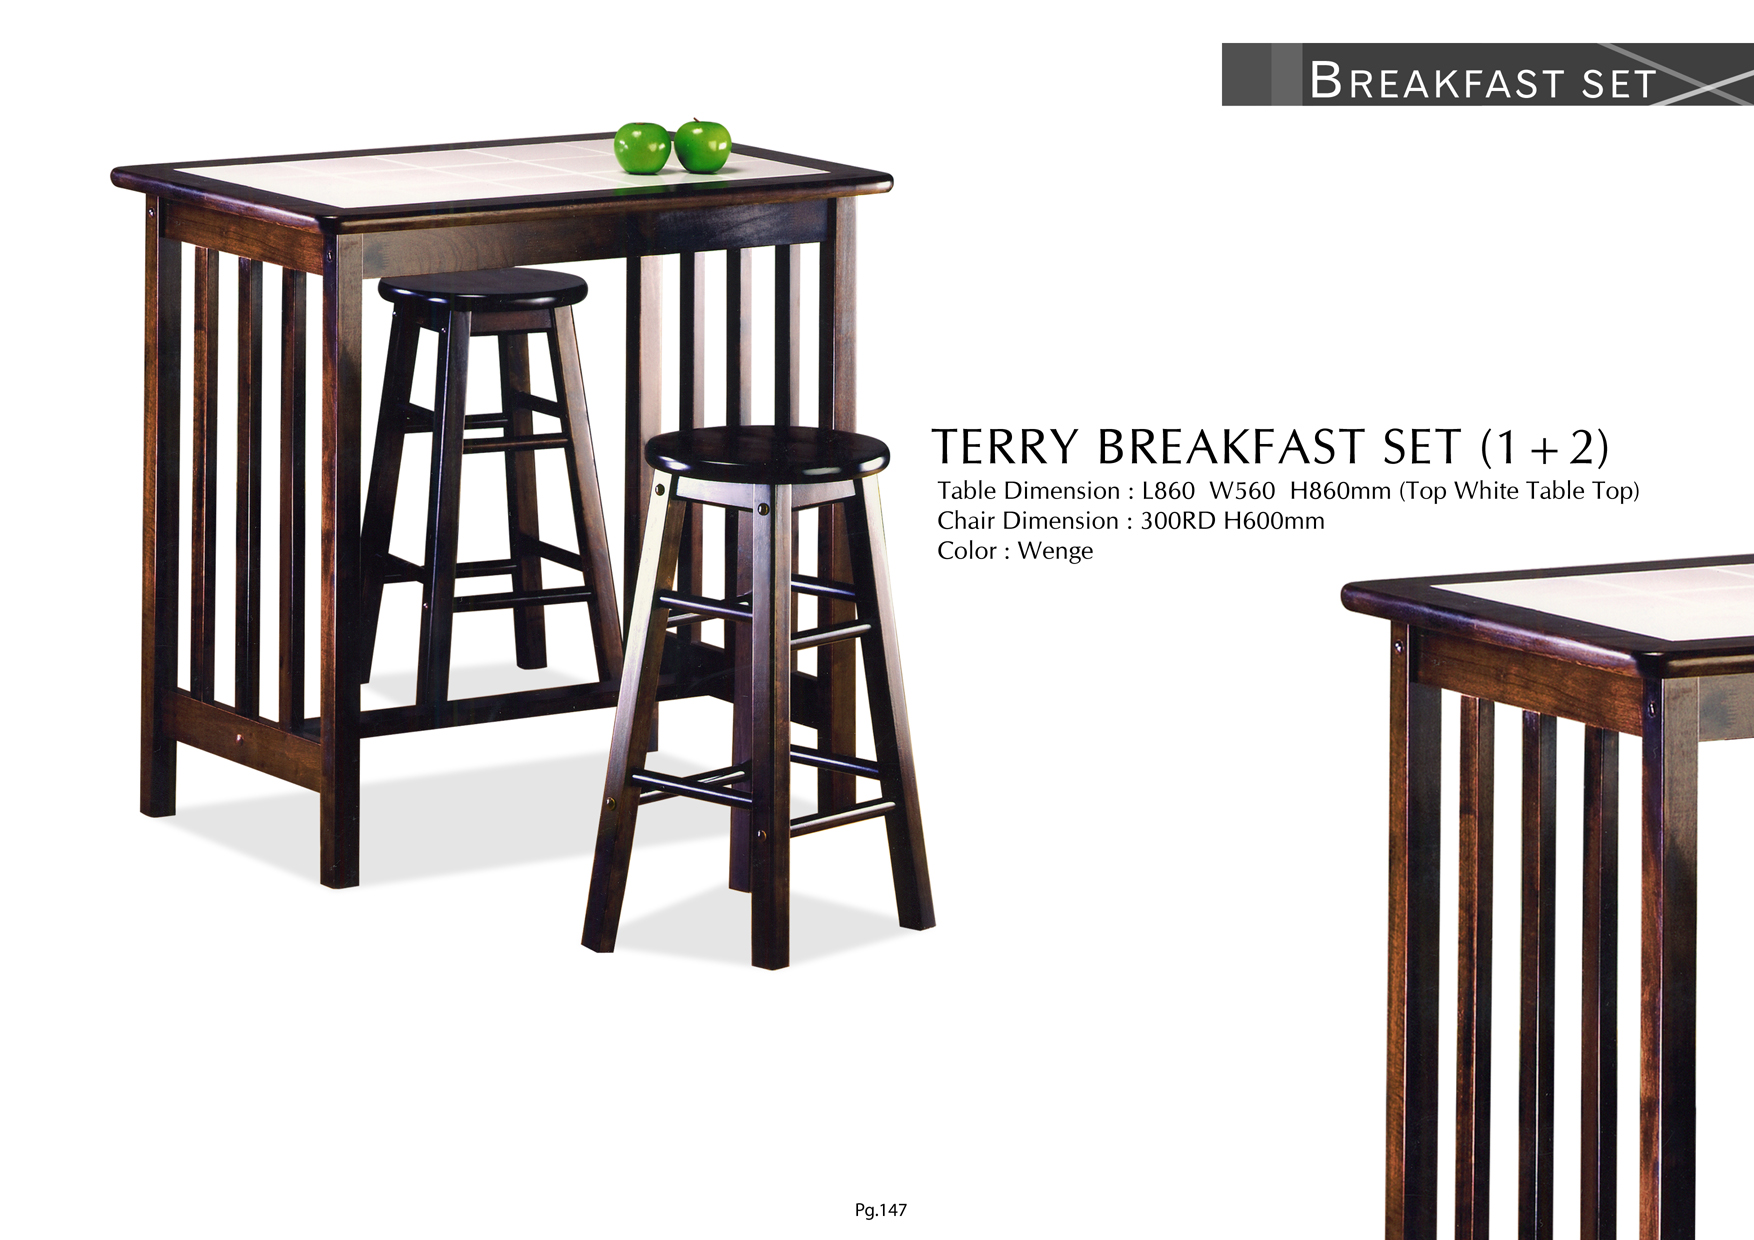 Product: PG147. TERRY BREAKFAST SET (1+2)